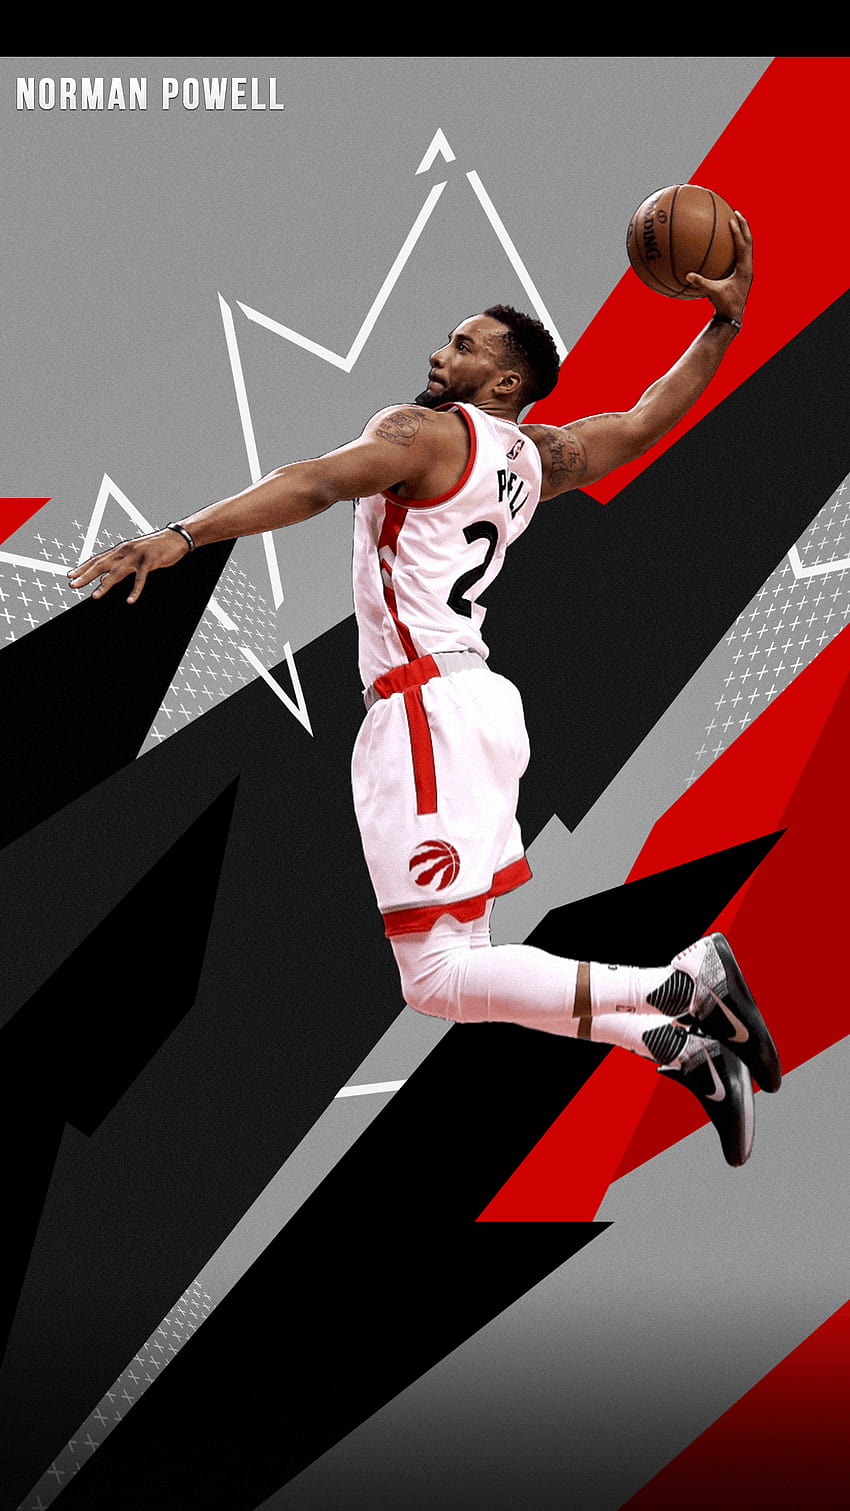 Norman Powell 18 style mobile I made, slam dunk mobile HD phone wallpaper